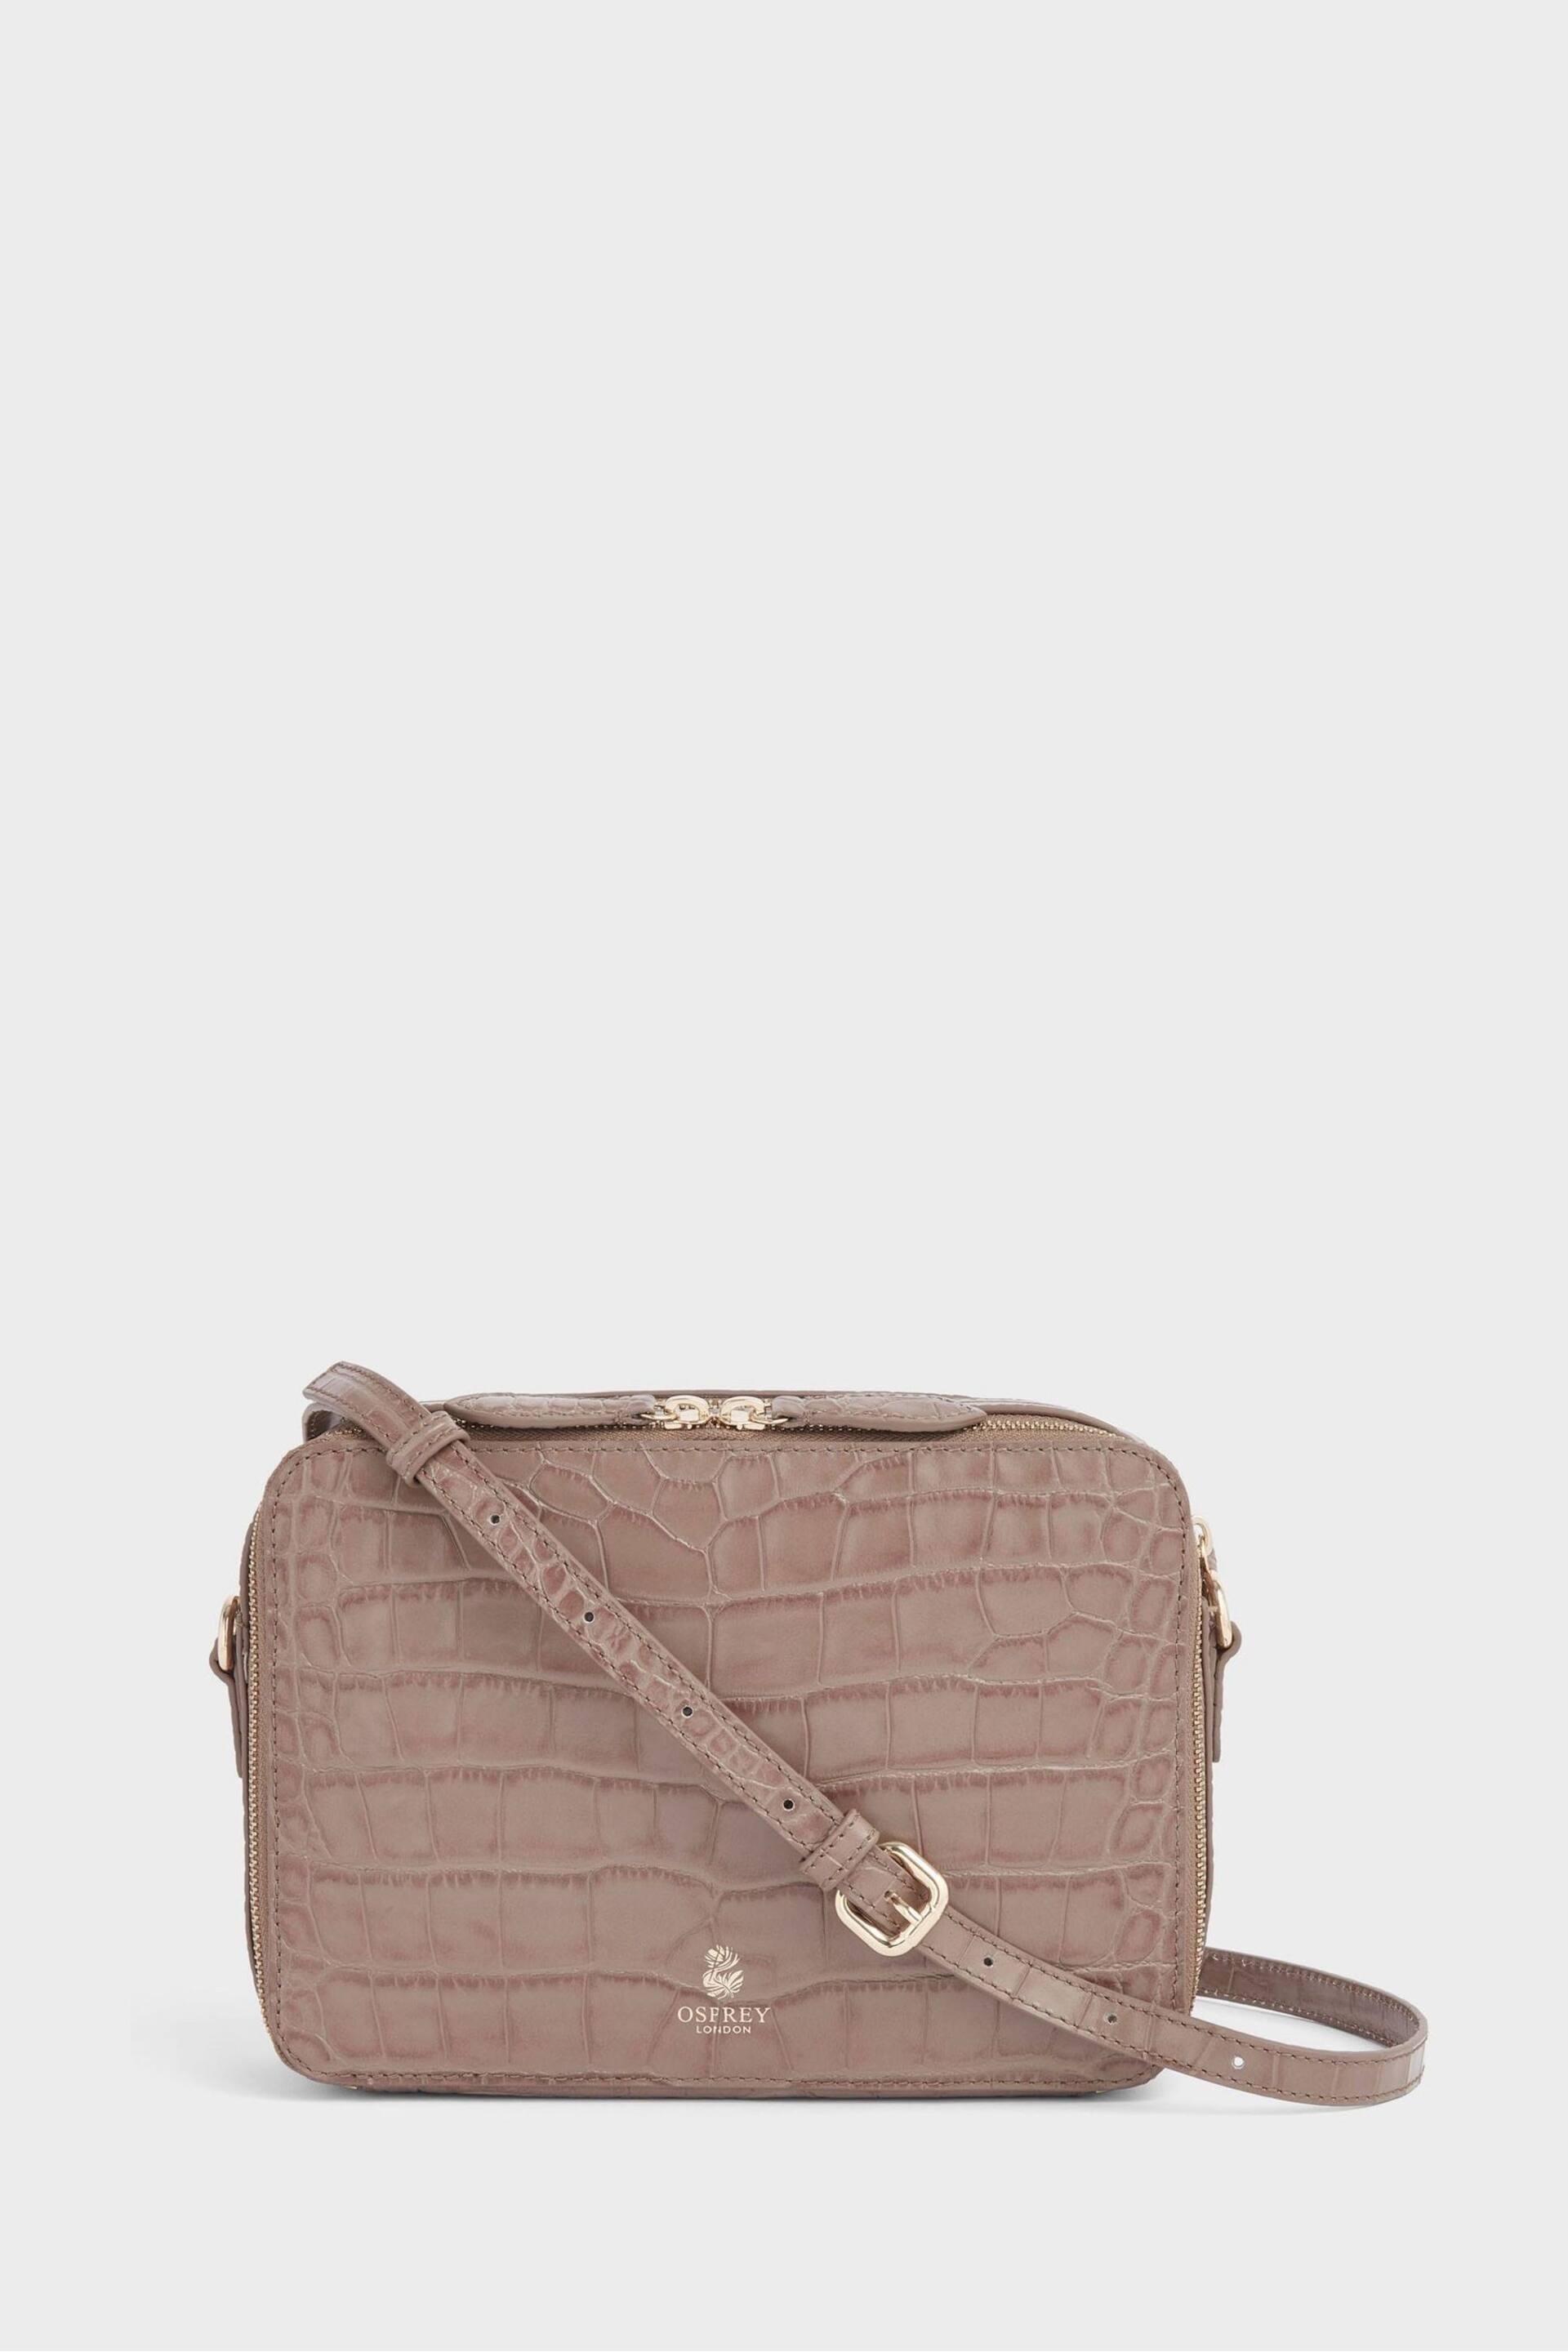 OSPREY LONDON The Wentworth Italian Leather Brown Cross-Body Bag - Image 1 of 5